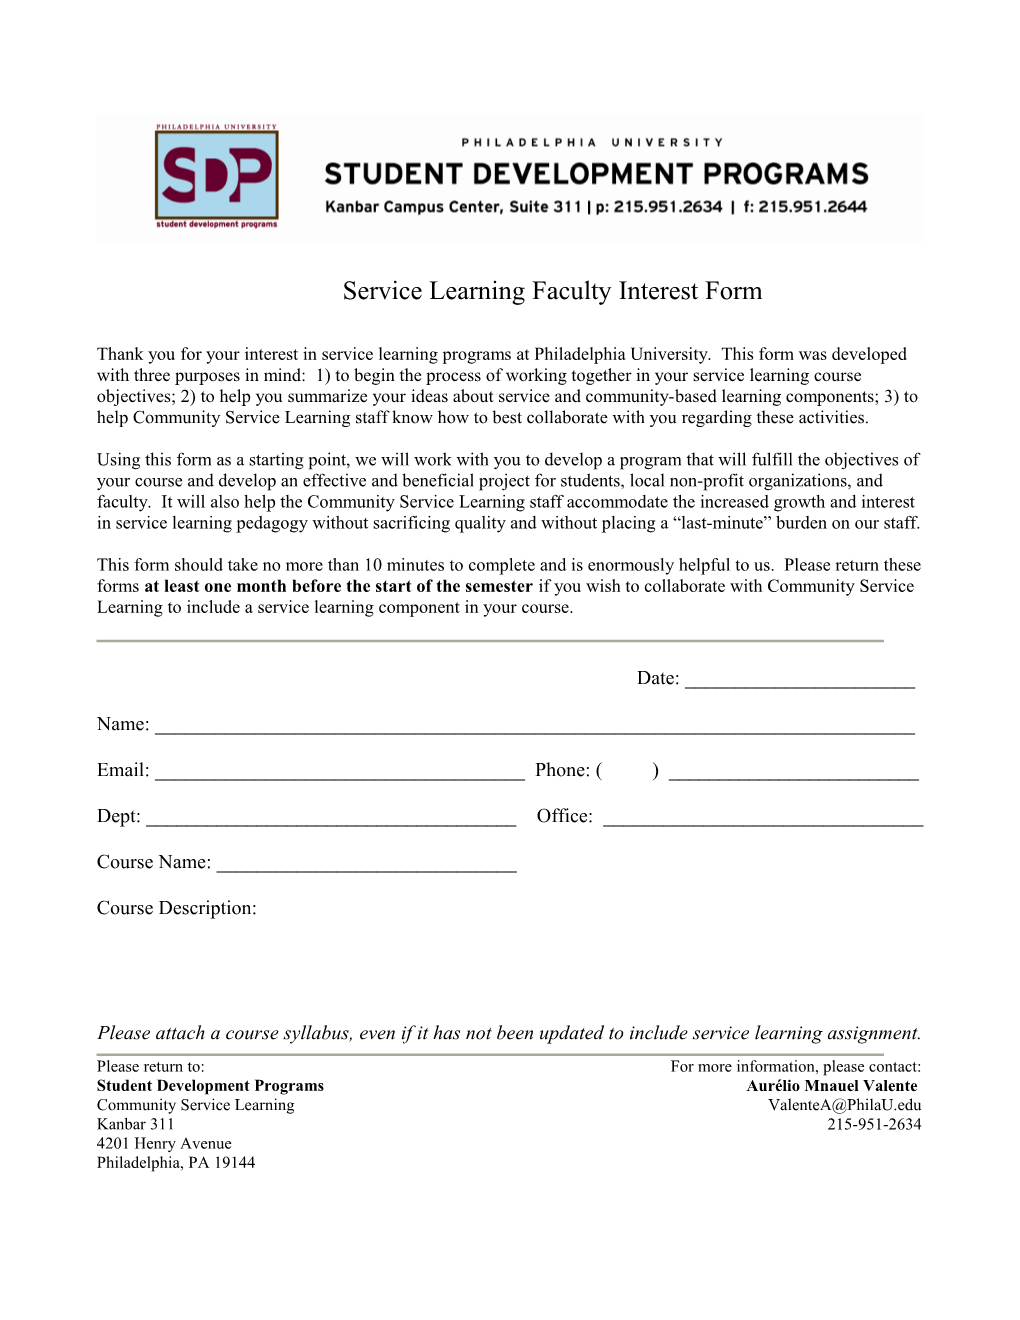 Service Learning Faculty Interest Form